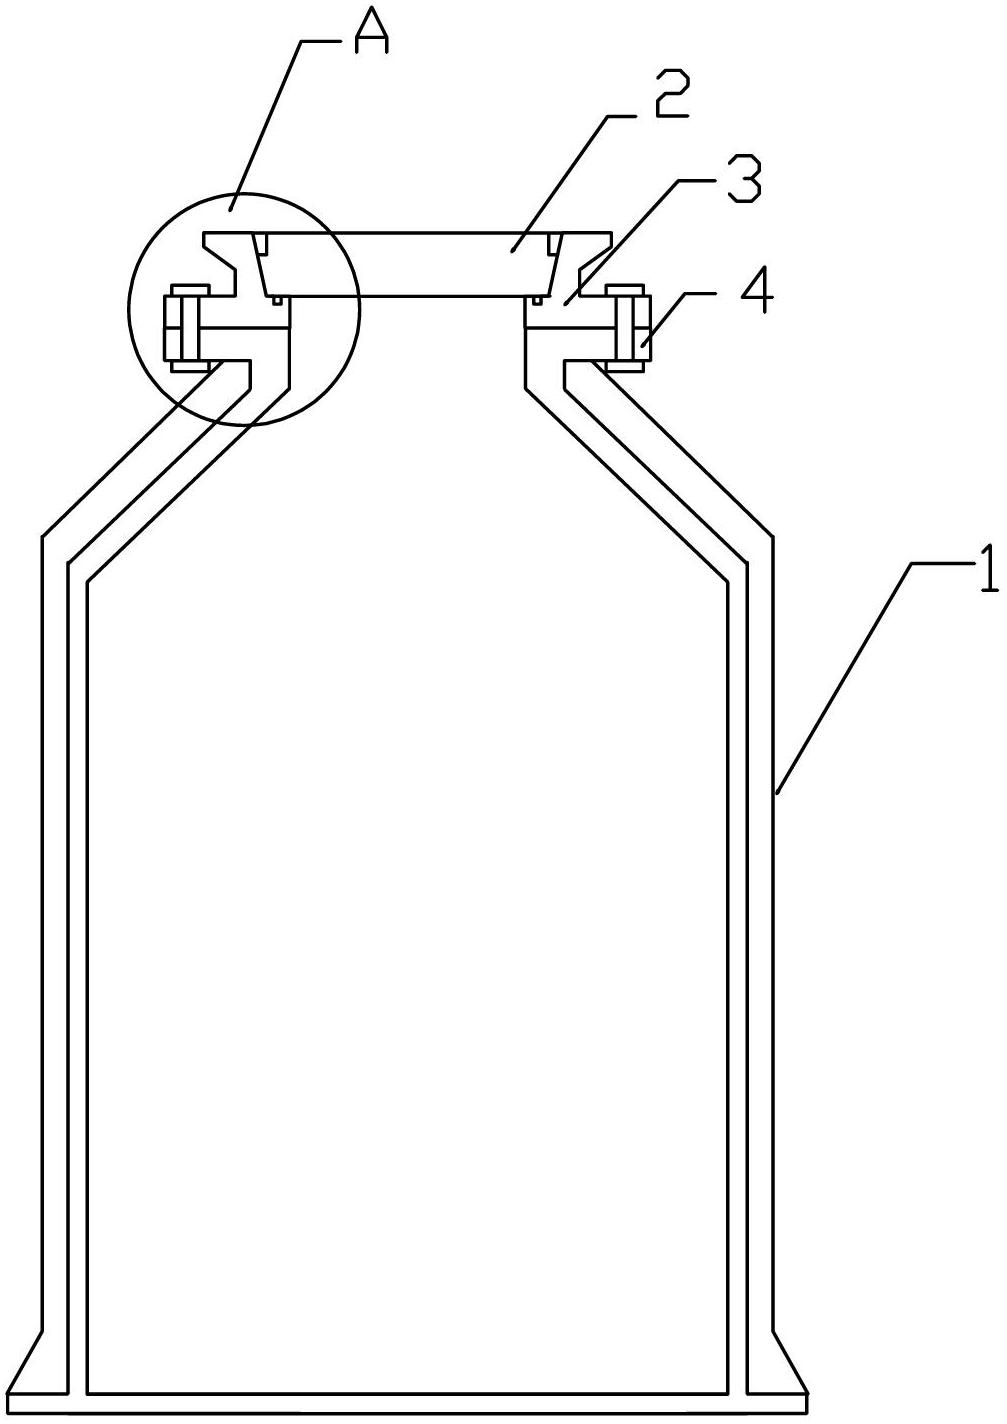 Glass reinforced plastic metal composite well and well construction method